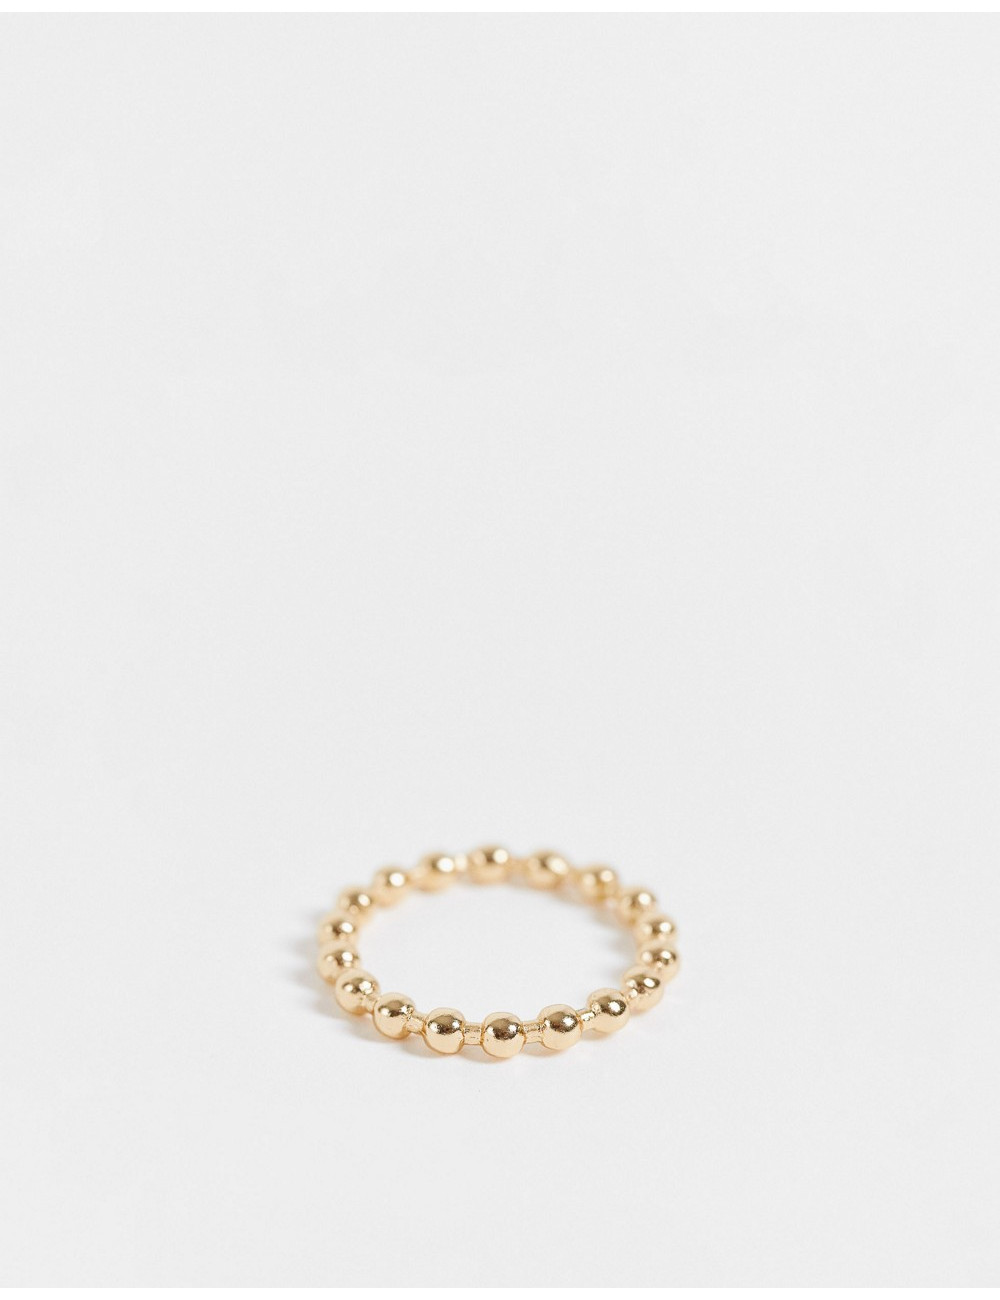 Topshop beaded ring in gold